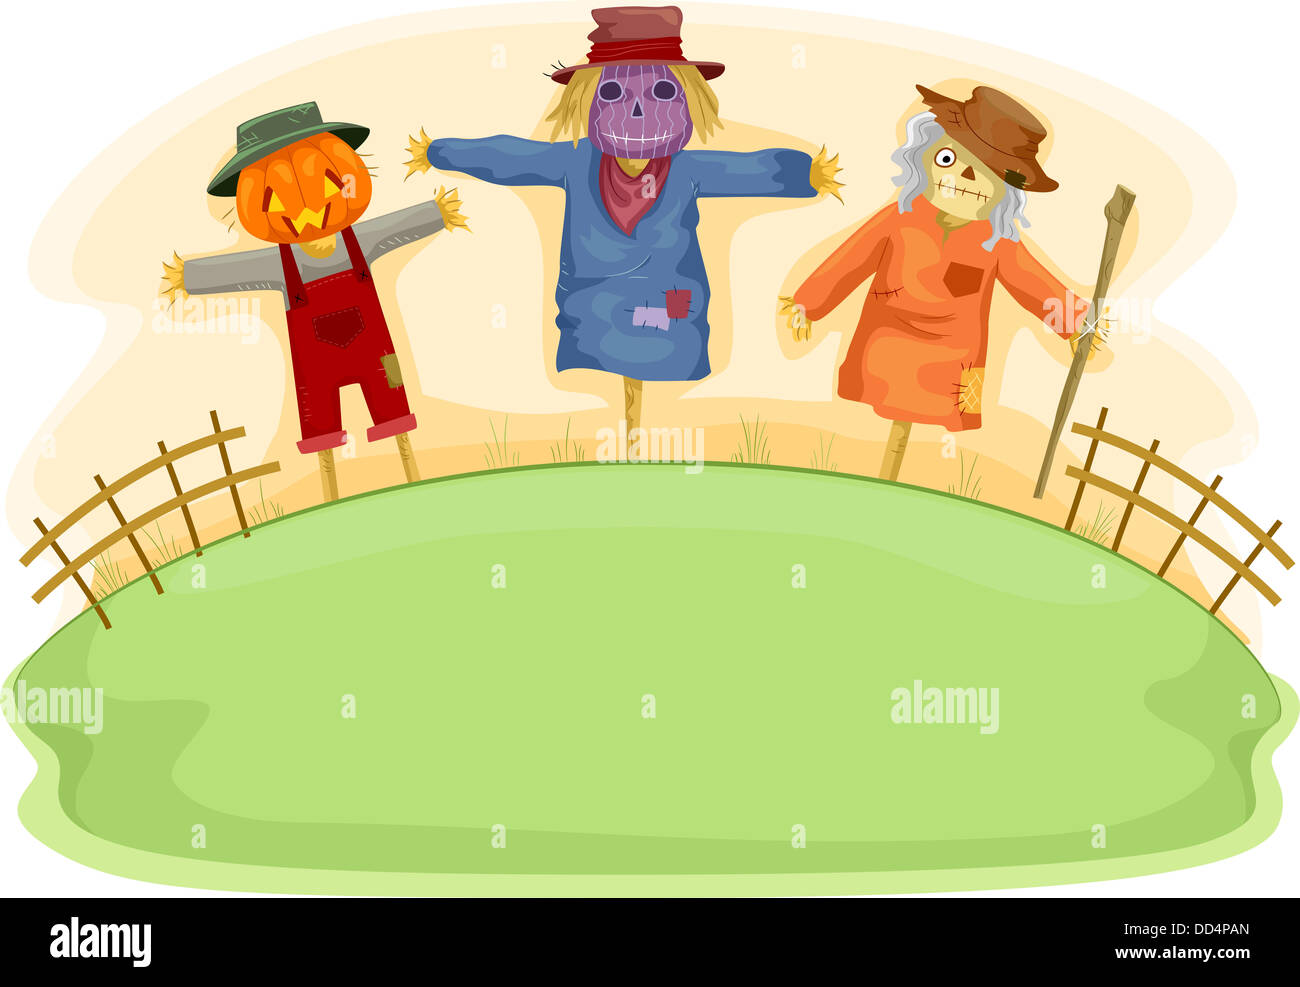 Illustration of Scary Scarecrows on a Fields Stock Photo